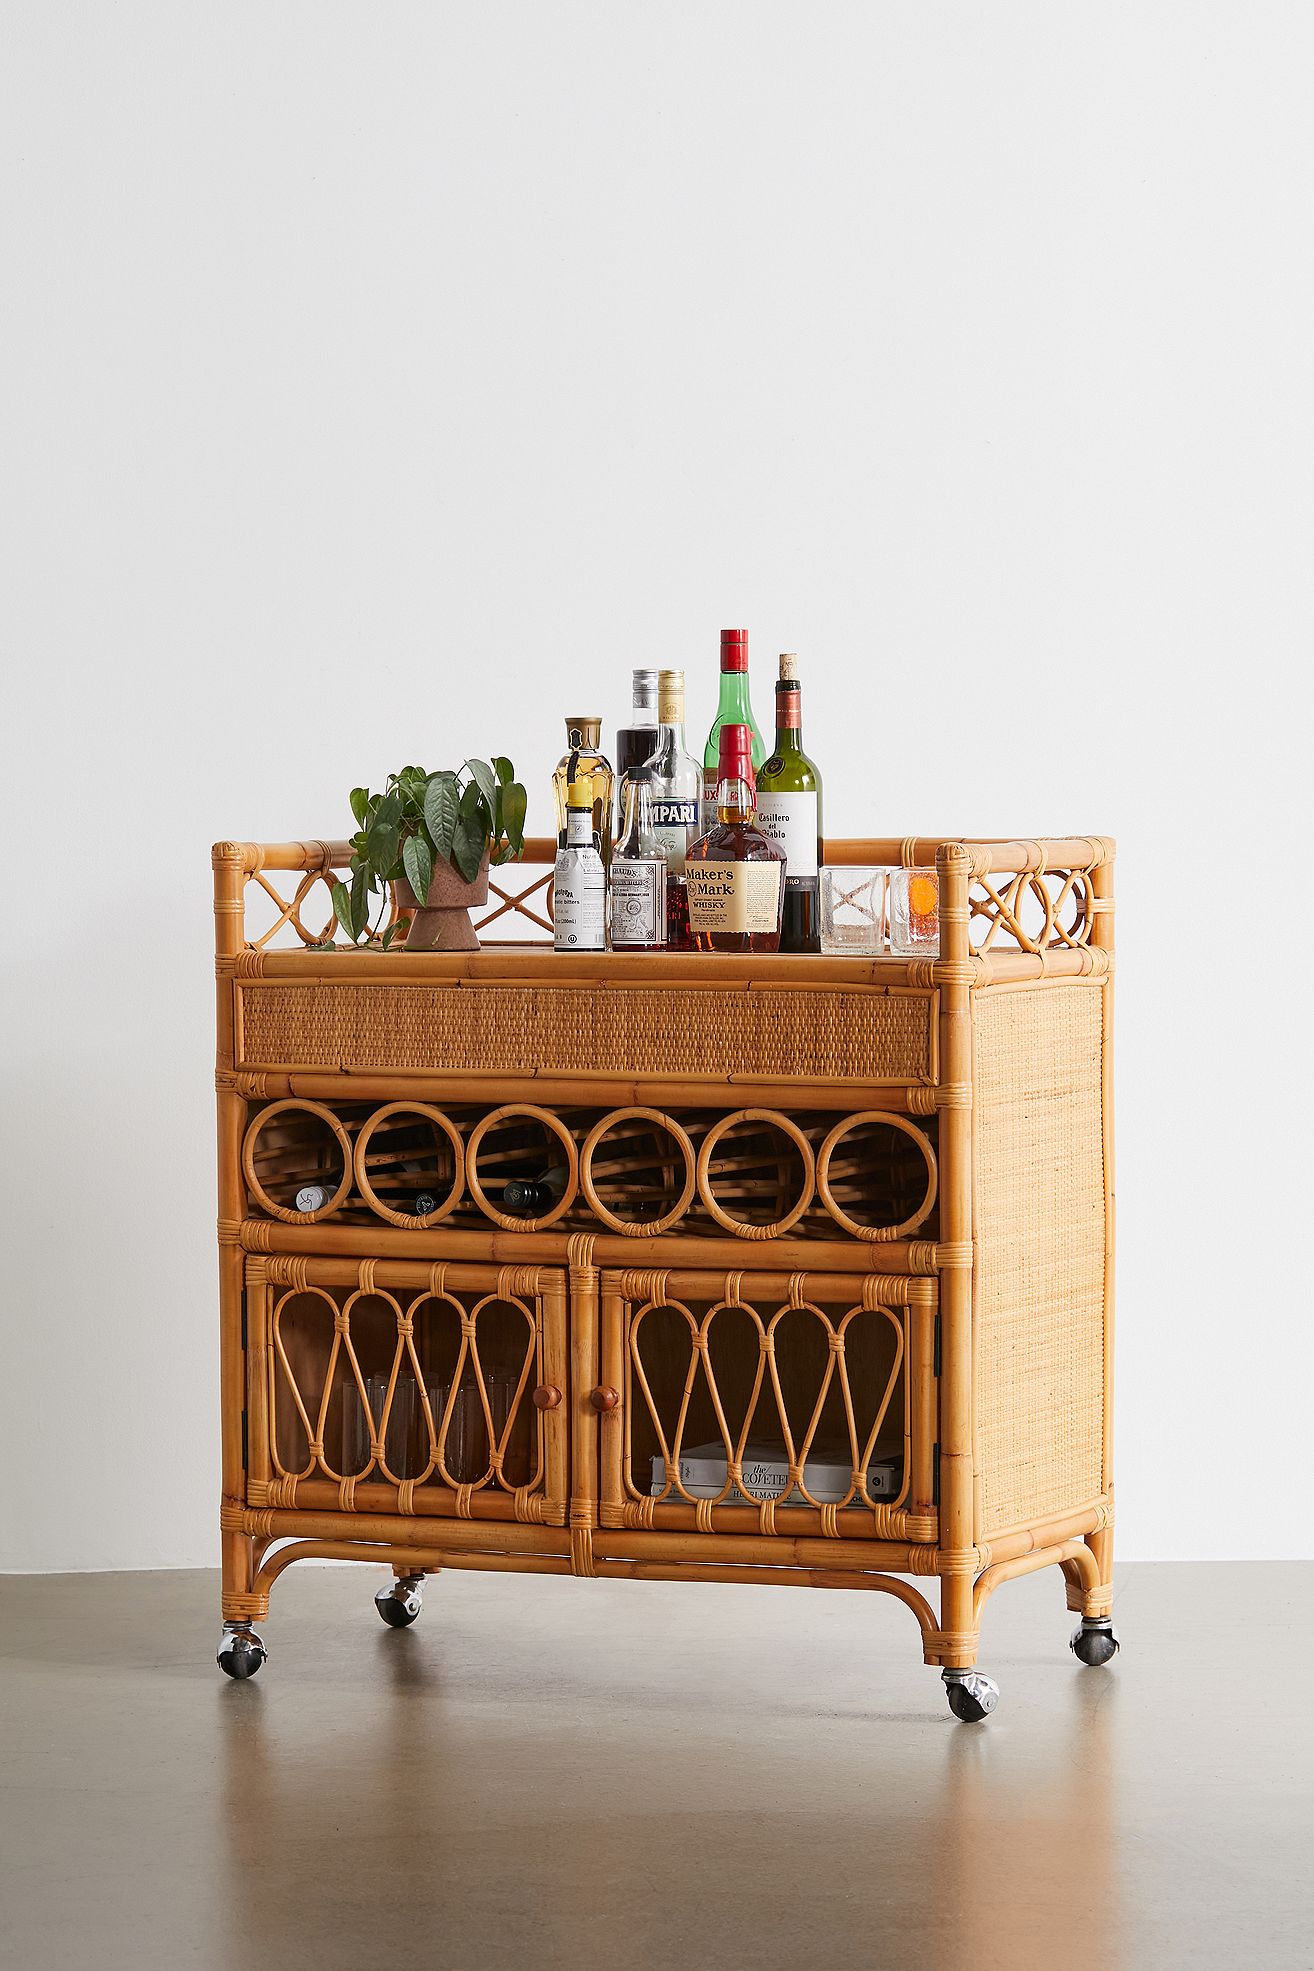 A Little Bird loves bar carts and drinks cabinets